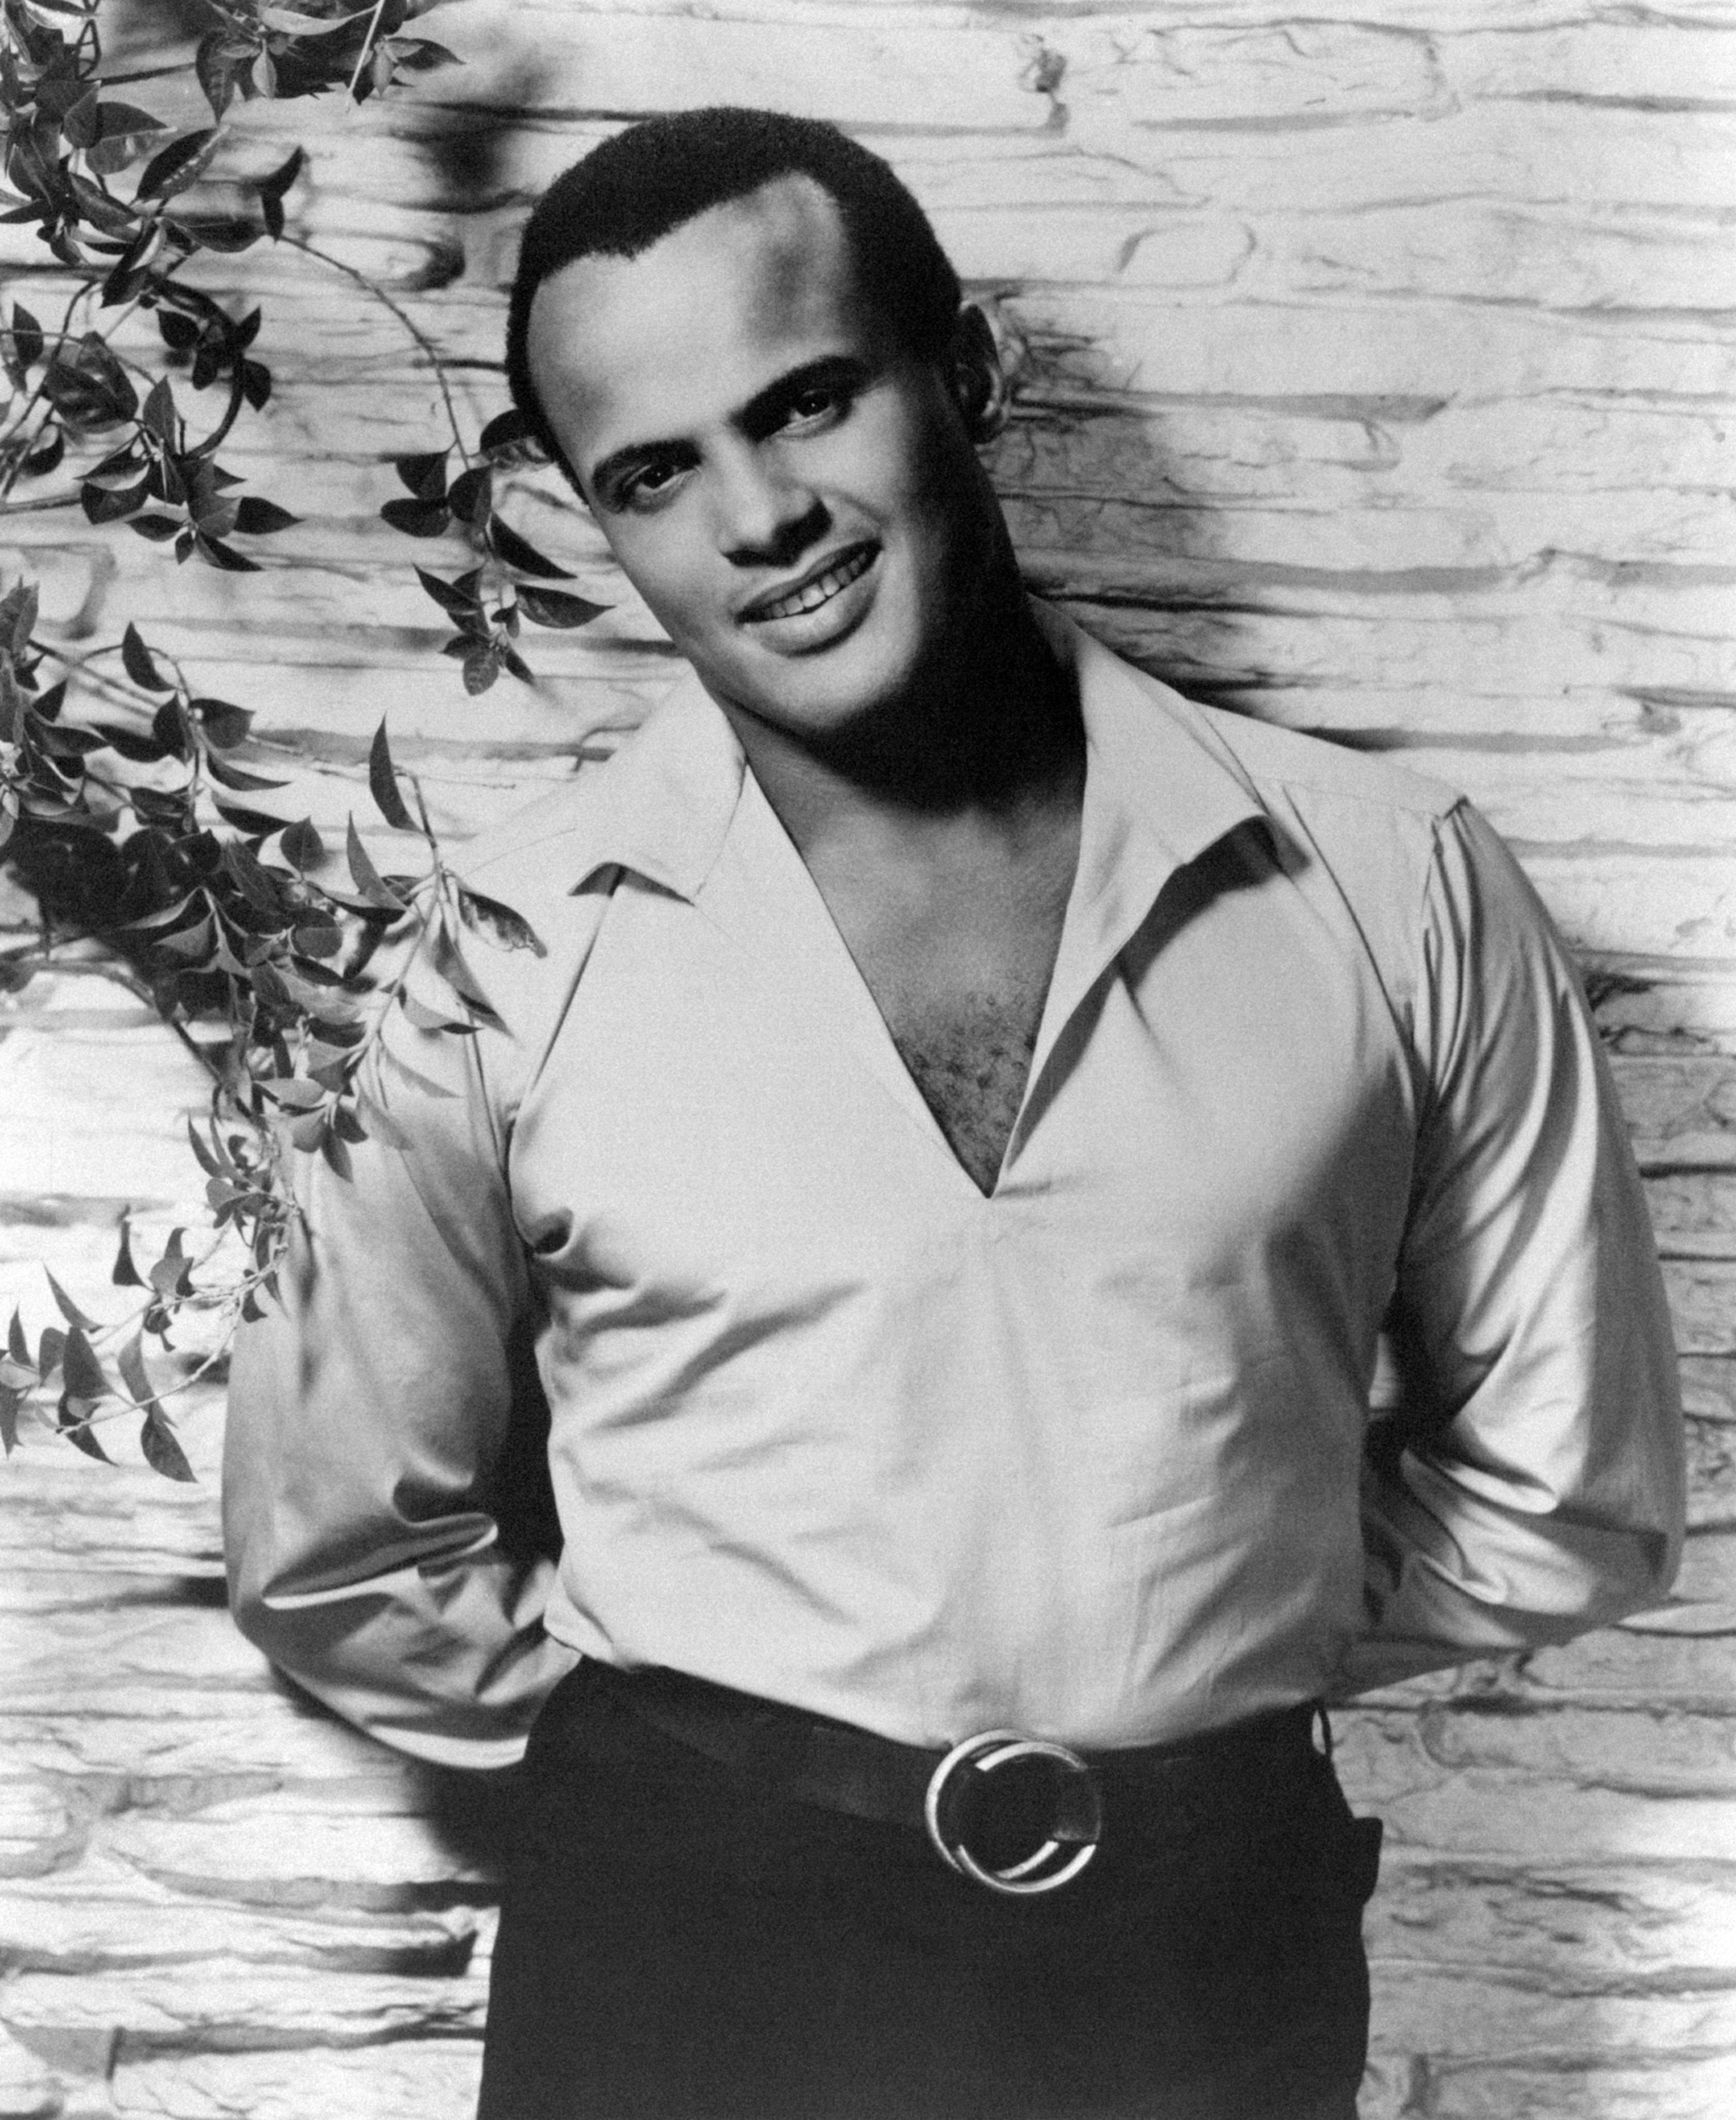 <p>Singer-songwriter and actor Harry Belafonte was the first Black man to win an Emmy Award. He took home the accolade in 1960 for his television special "Tonight With Belafonte." This wasn't his first historic win, however: In 1954, he became the first Black man to win a Tony Award. He earned the honor for his work in the Broadway production of "John Murray Anderson's Almanac." </p>